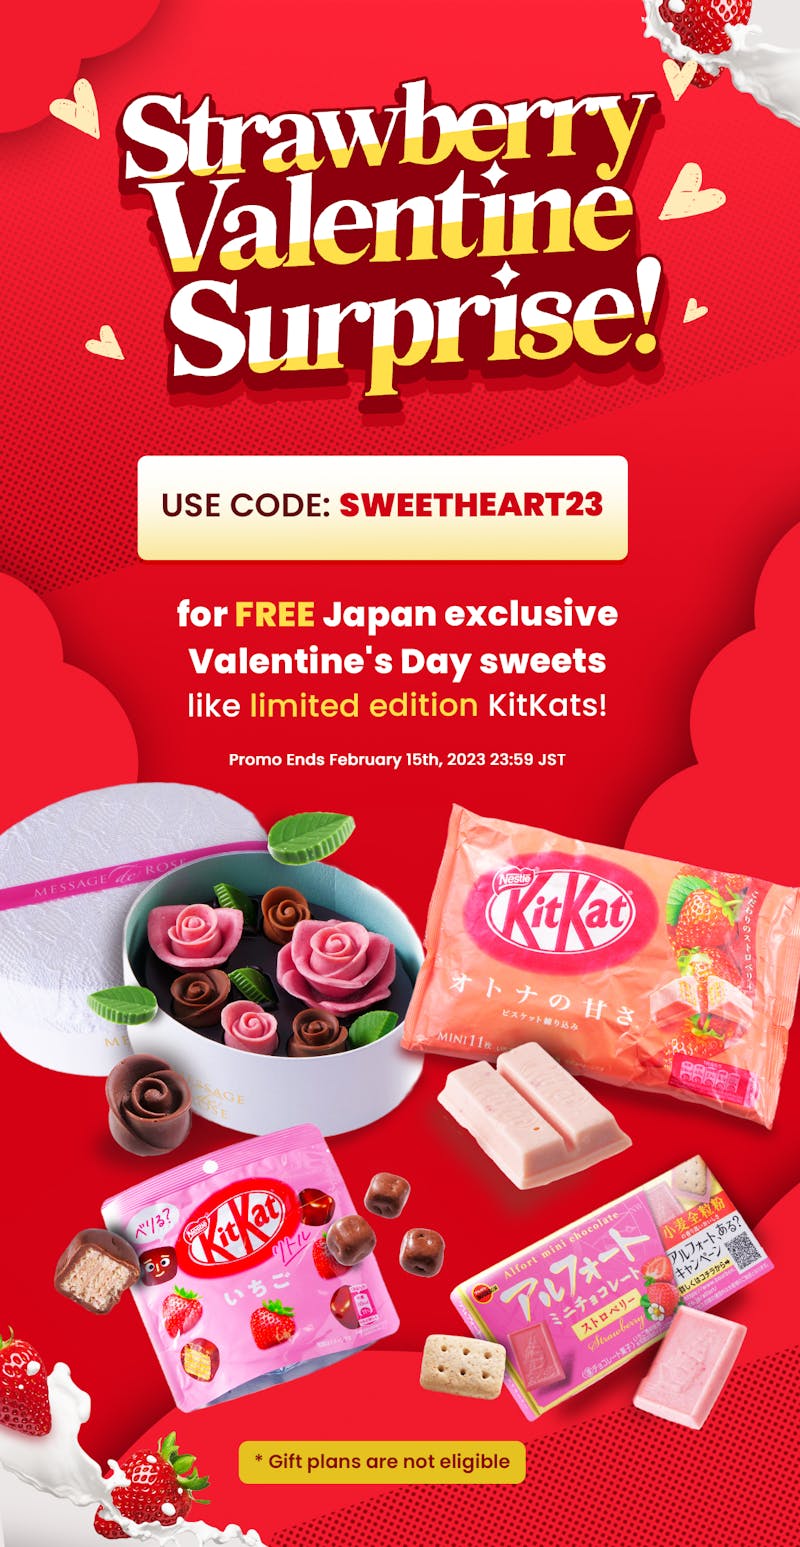 TokyoTreat's Strawberry Valentine Surprise campaign with KitKat Japan and bonus exclusive Japanese sweets.